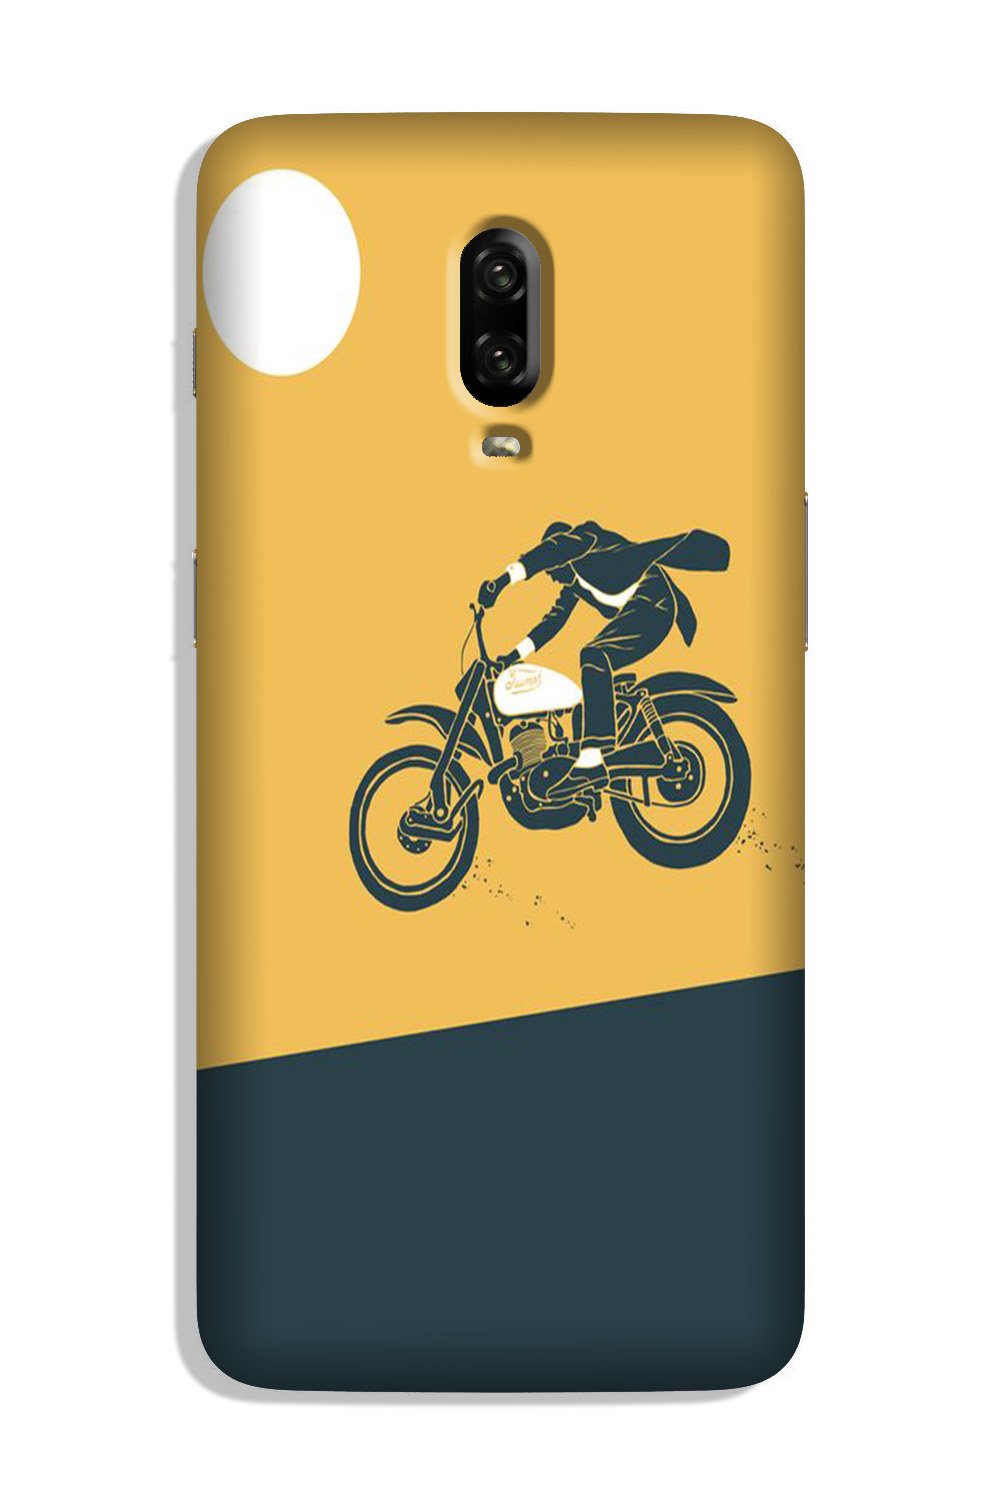 Bike Lovers Case for OnePlus 6T (Design No. 256)